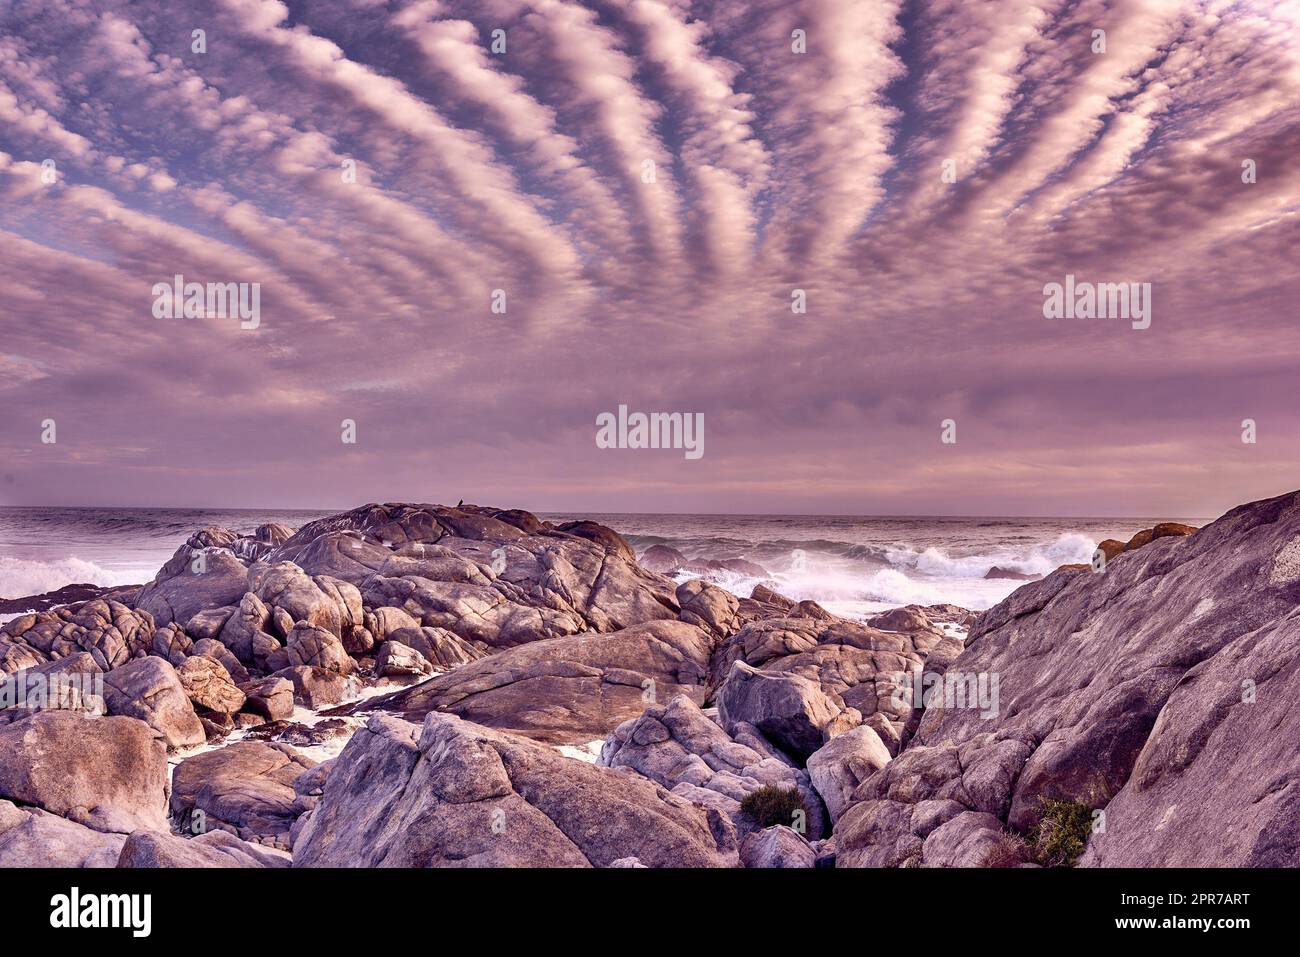 Dreamy beach. Ocean view - Camps Bay, Table Mountain National Park, Cape Town, South AfricaBeach, sunshine and clouds. Stock Photo